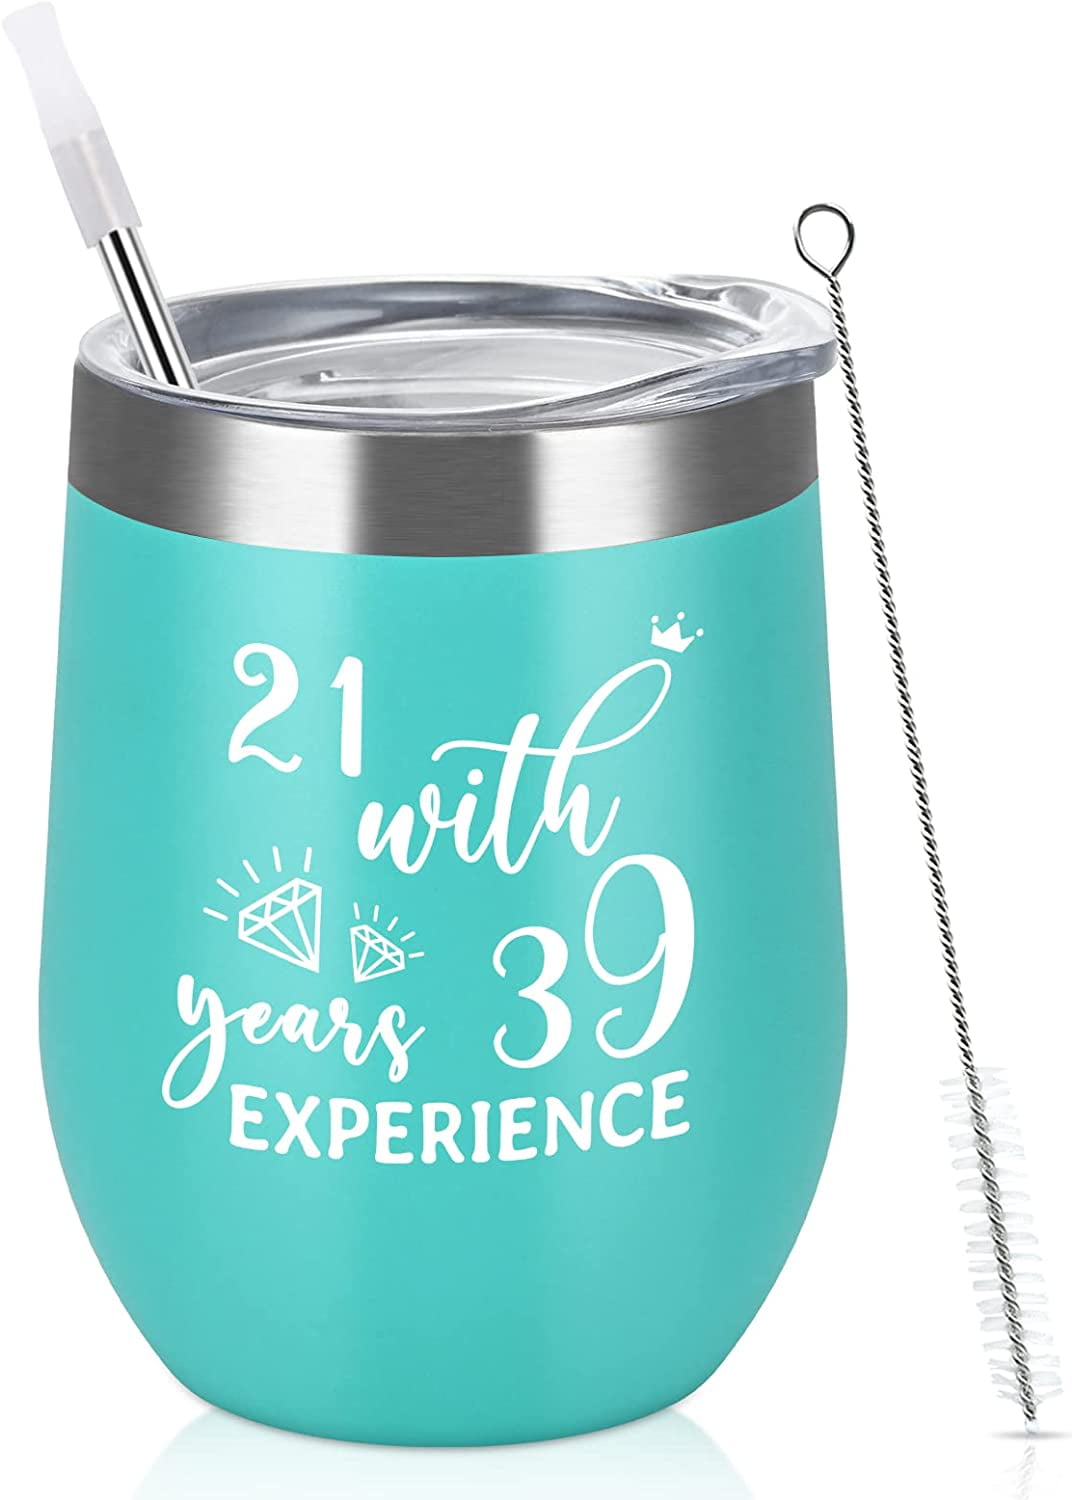 12oz Stainless Steel Tumbler + 2oz Shot Glass 60th Birthday Gifts For Women  Ideas, 60th Birthday Decorations For Women, 60th Birthday Gifts, Happy 60th  Birthday Funny Gifts For Women, Mom Turnning 60 